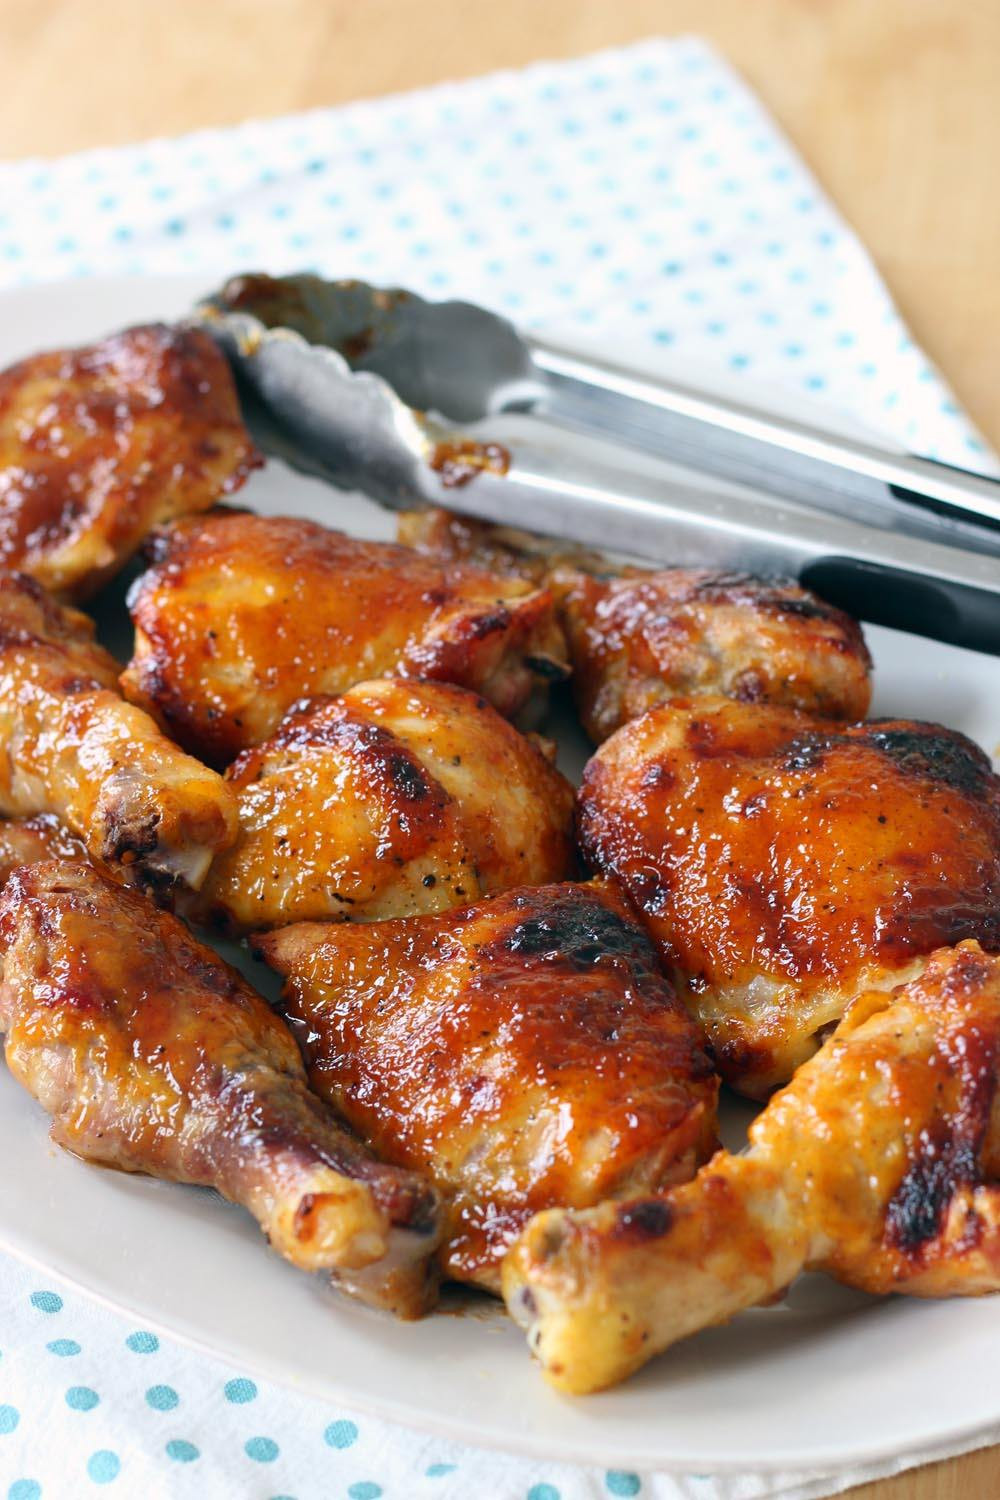 Baked Bbq Chicken Recipe
 20 Chicken Recipes To Make Every Meal Healthy And Fulfilling